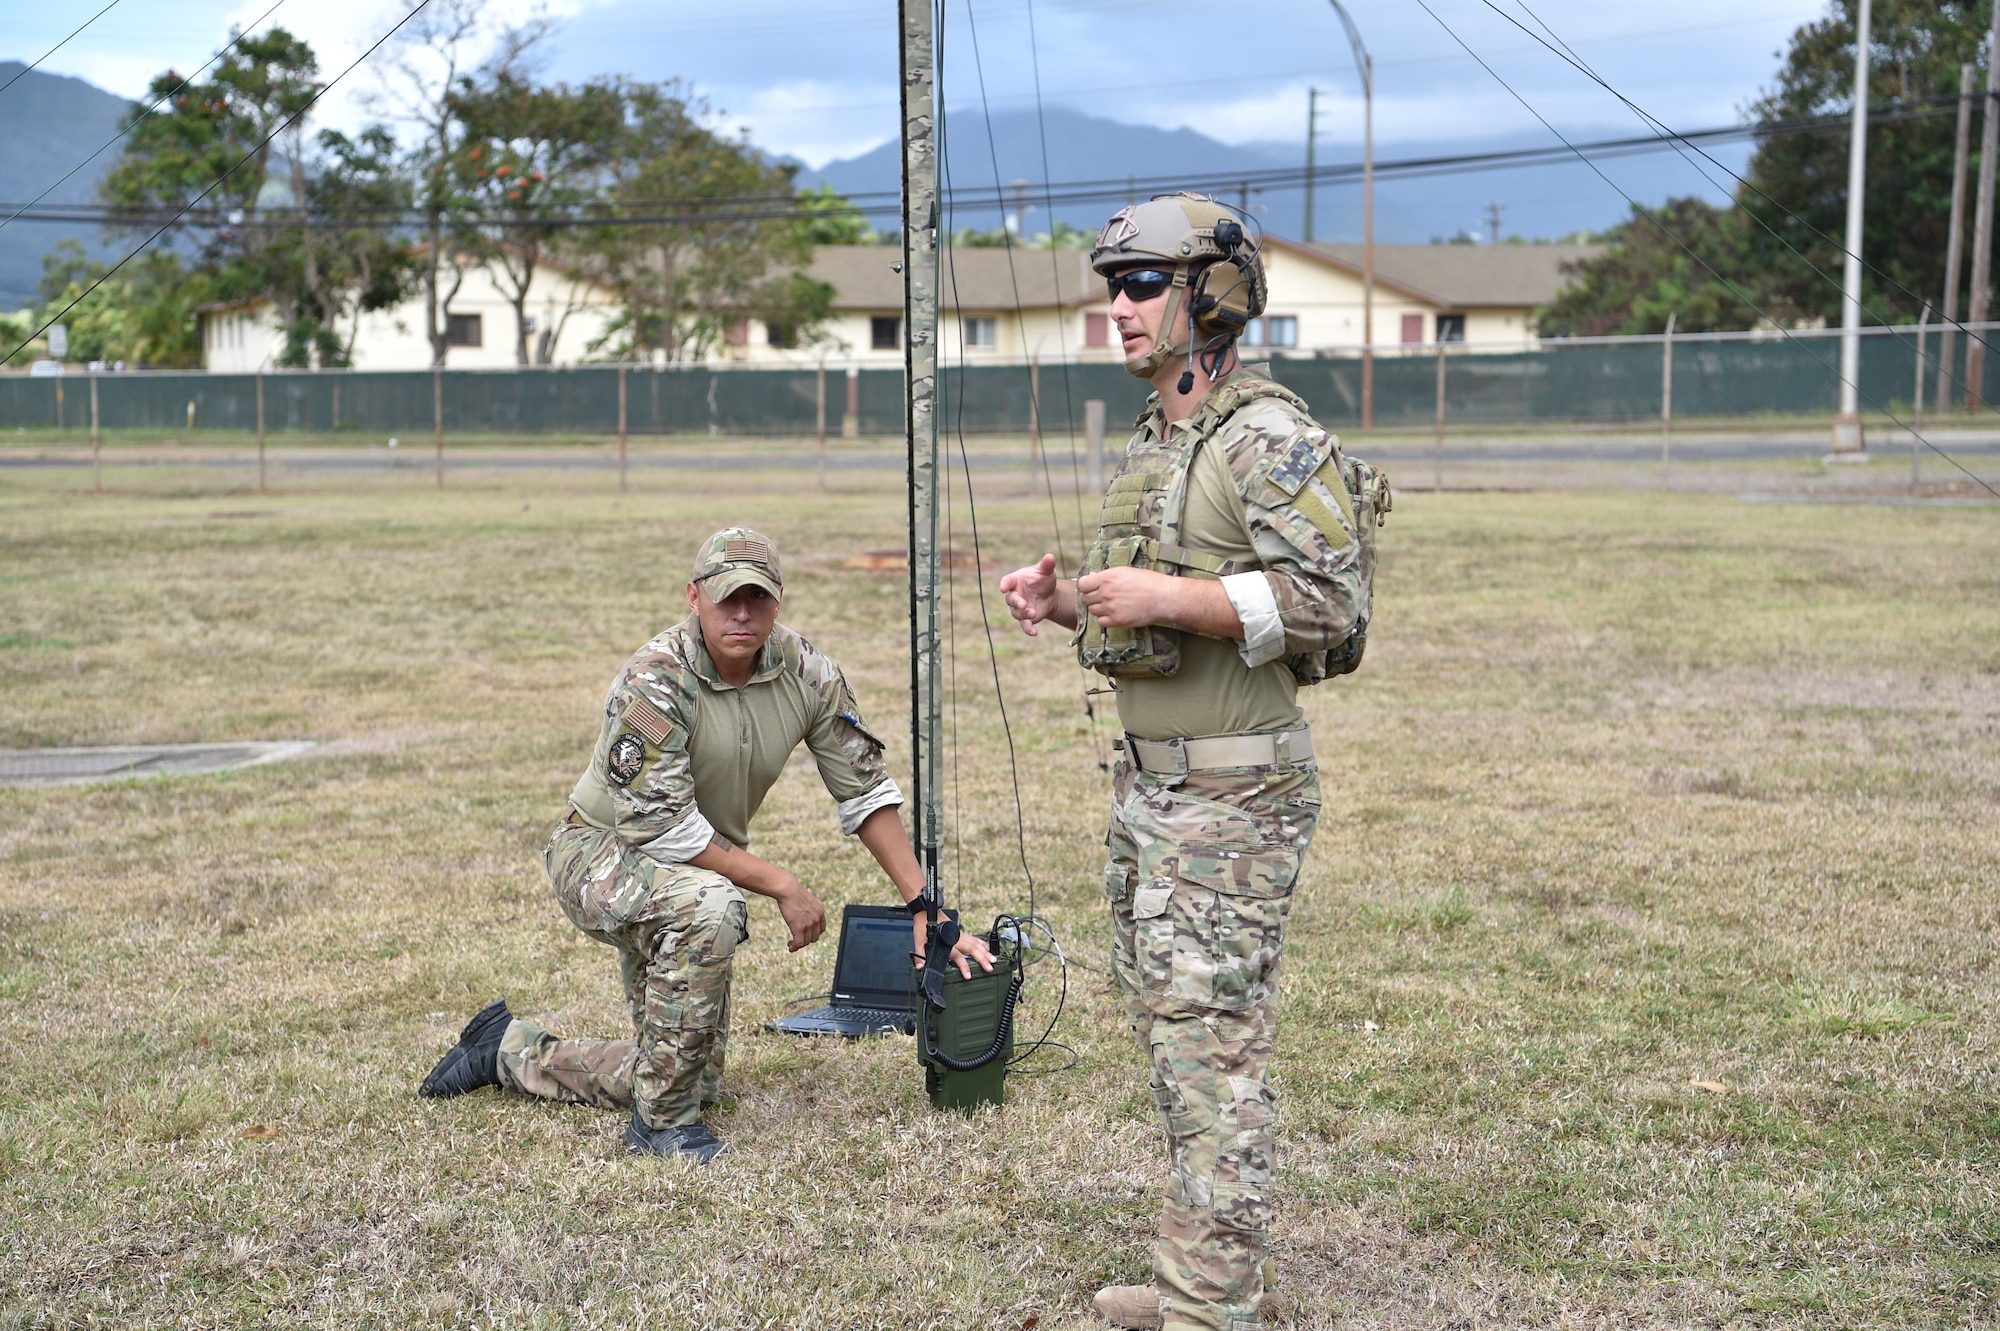 Airman First Class Eric Bravo and Tech. Sgt. Joshua McKeever, both 25th Air Support Operations Squadron tactical air control party Airmen, instruct how the infield radio antenna enables communication in the field at Joint Base Pearl Harbor-Hickam, Hawaii, August 5, 2020. The lesson helped Airmen understand the communications network they will deal with in a deployed location. (U.S. Air Force photo by 2nd Lt. Benjamin Aronson)